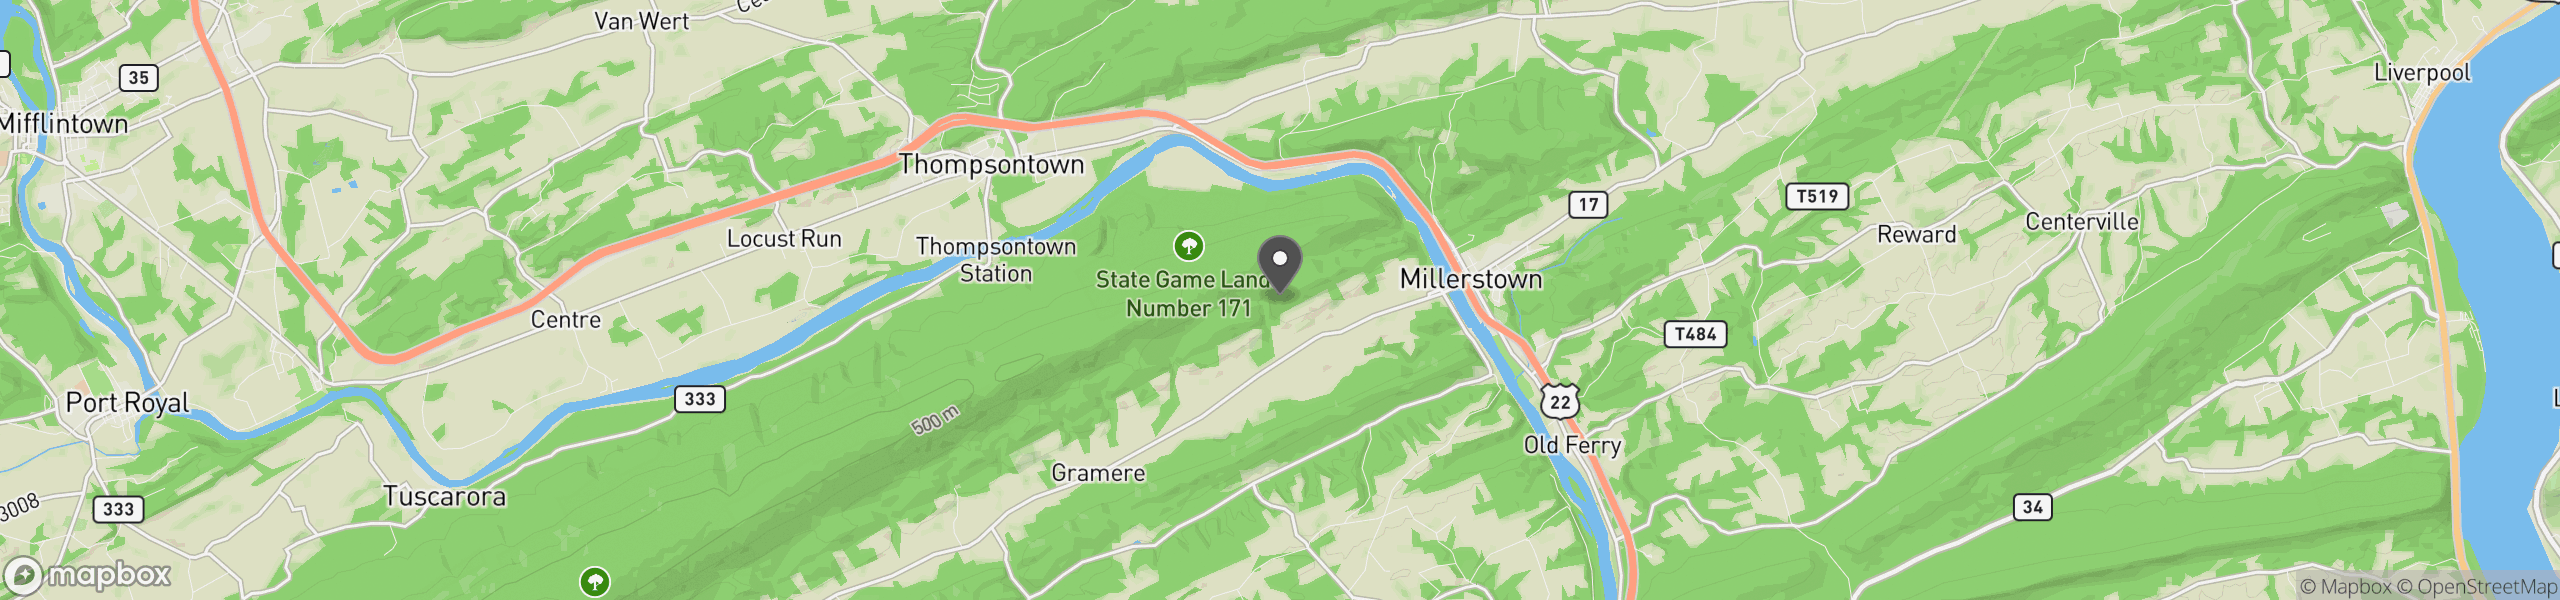 Millerstown, PA 17062